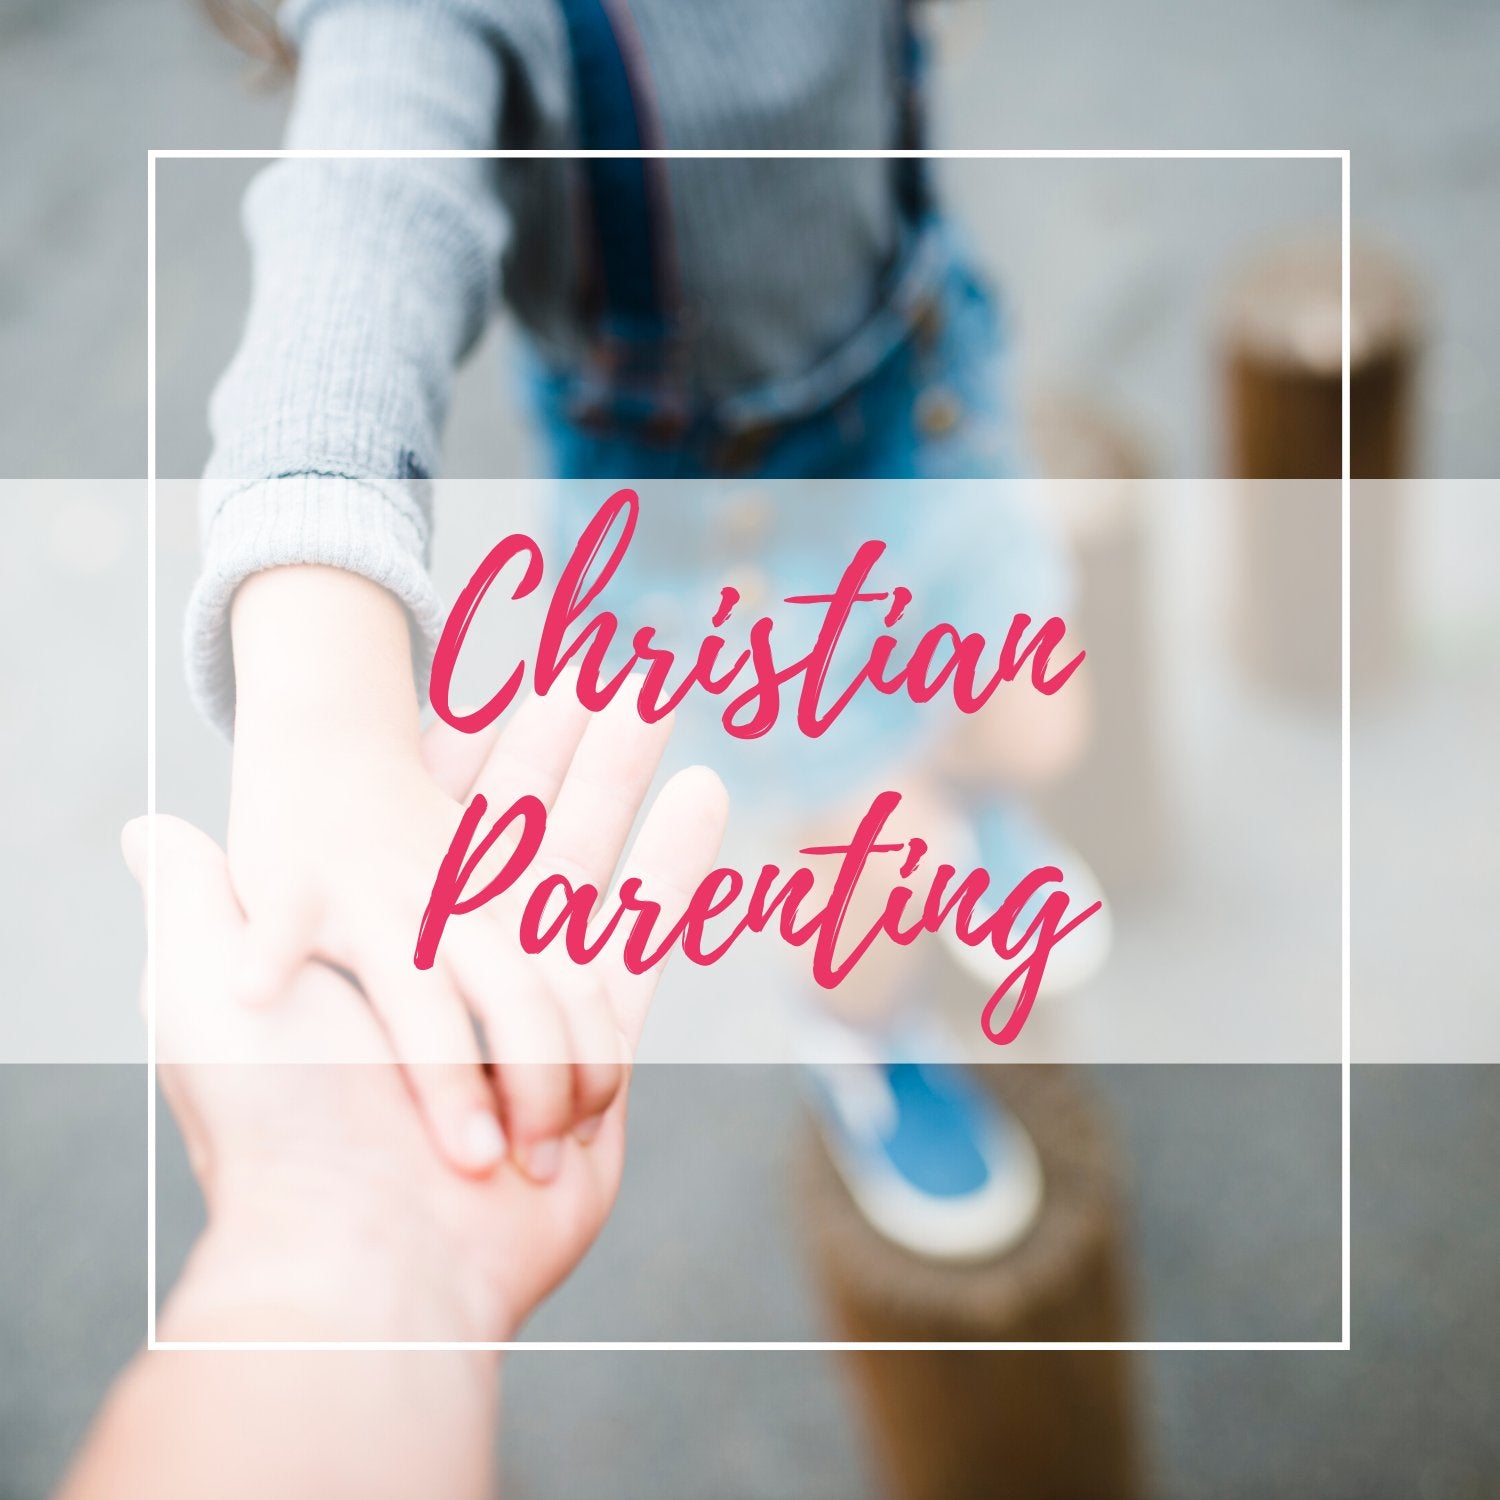 Christian Parenting Resources to help you raise Godly kids